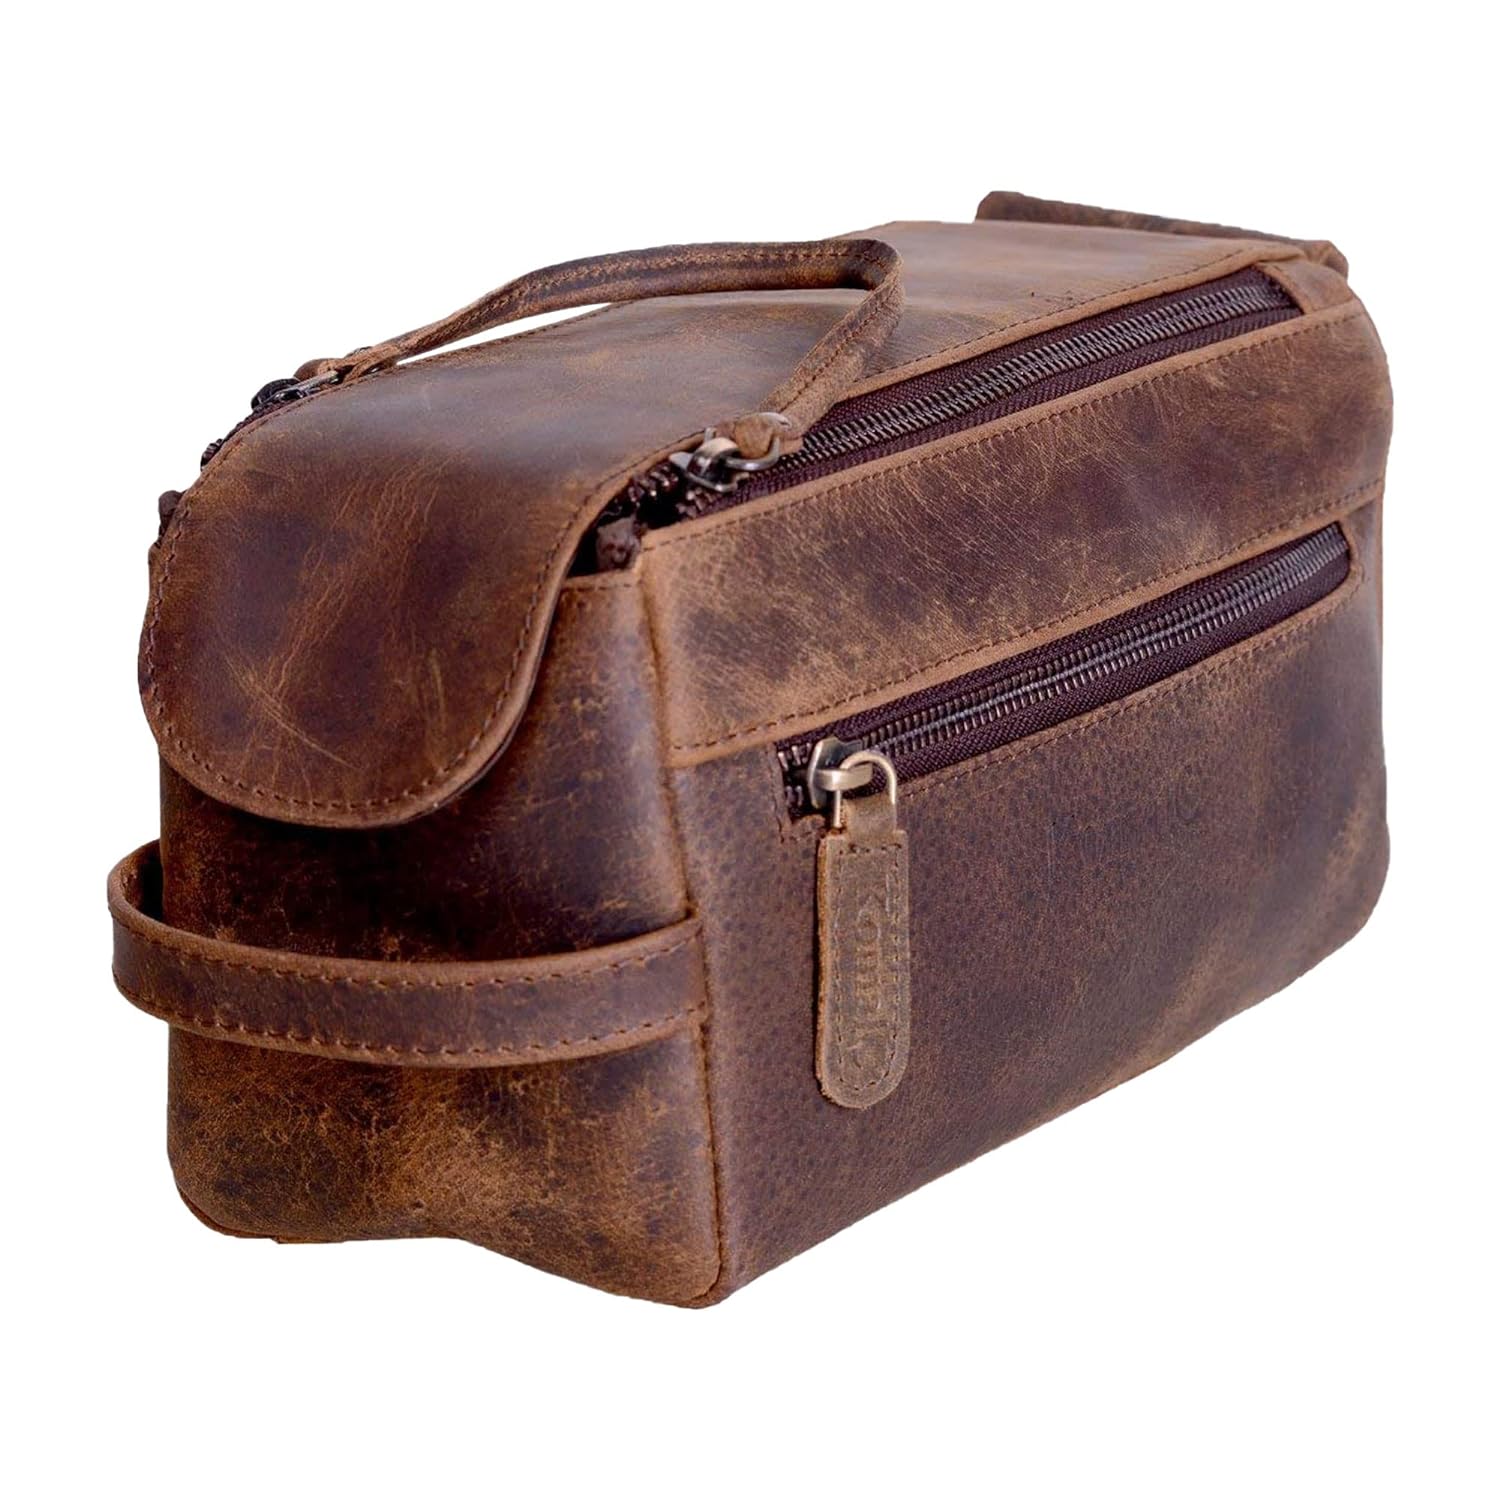 Leather Toiletry Bag-The Best Gifts For Travelers